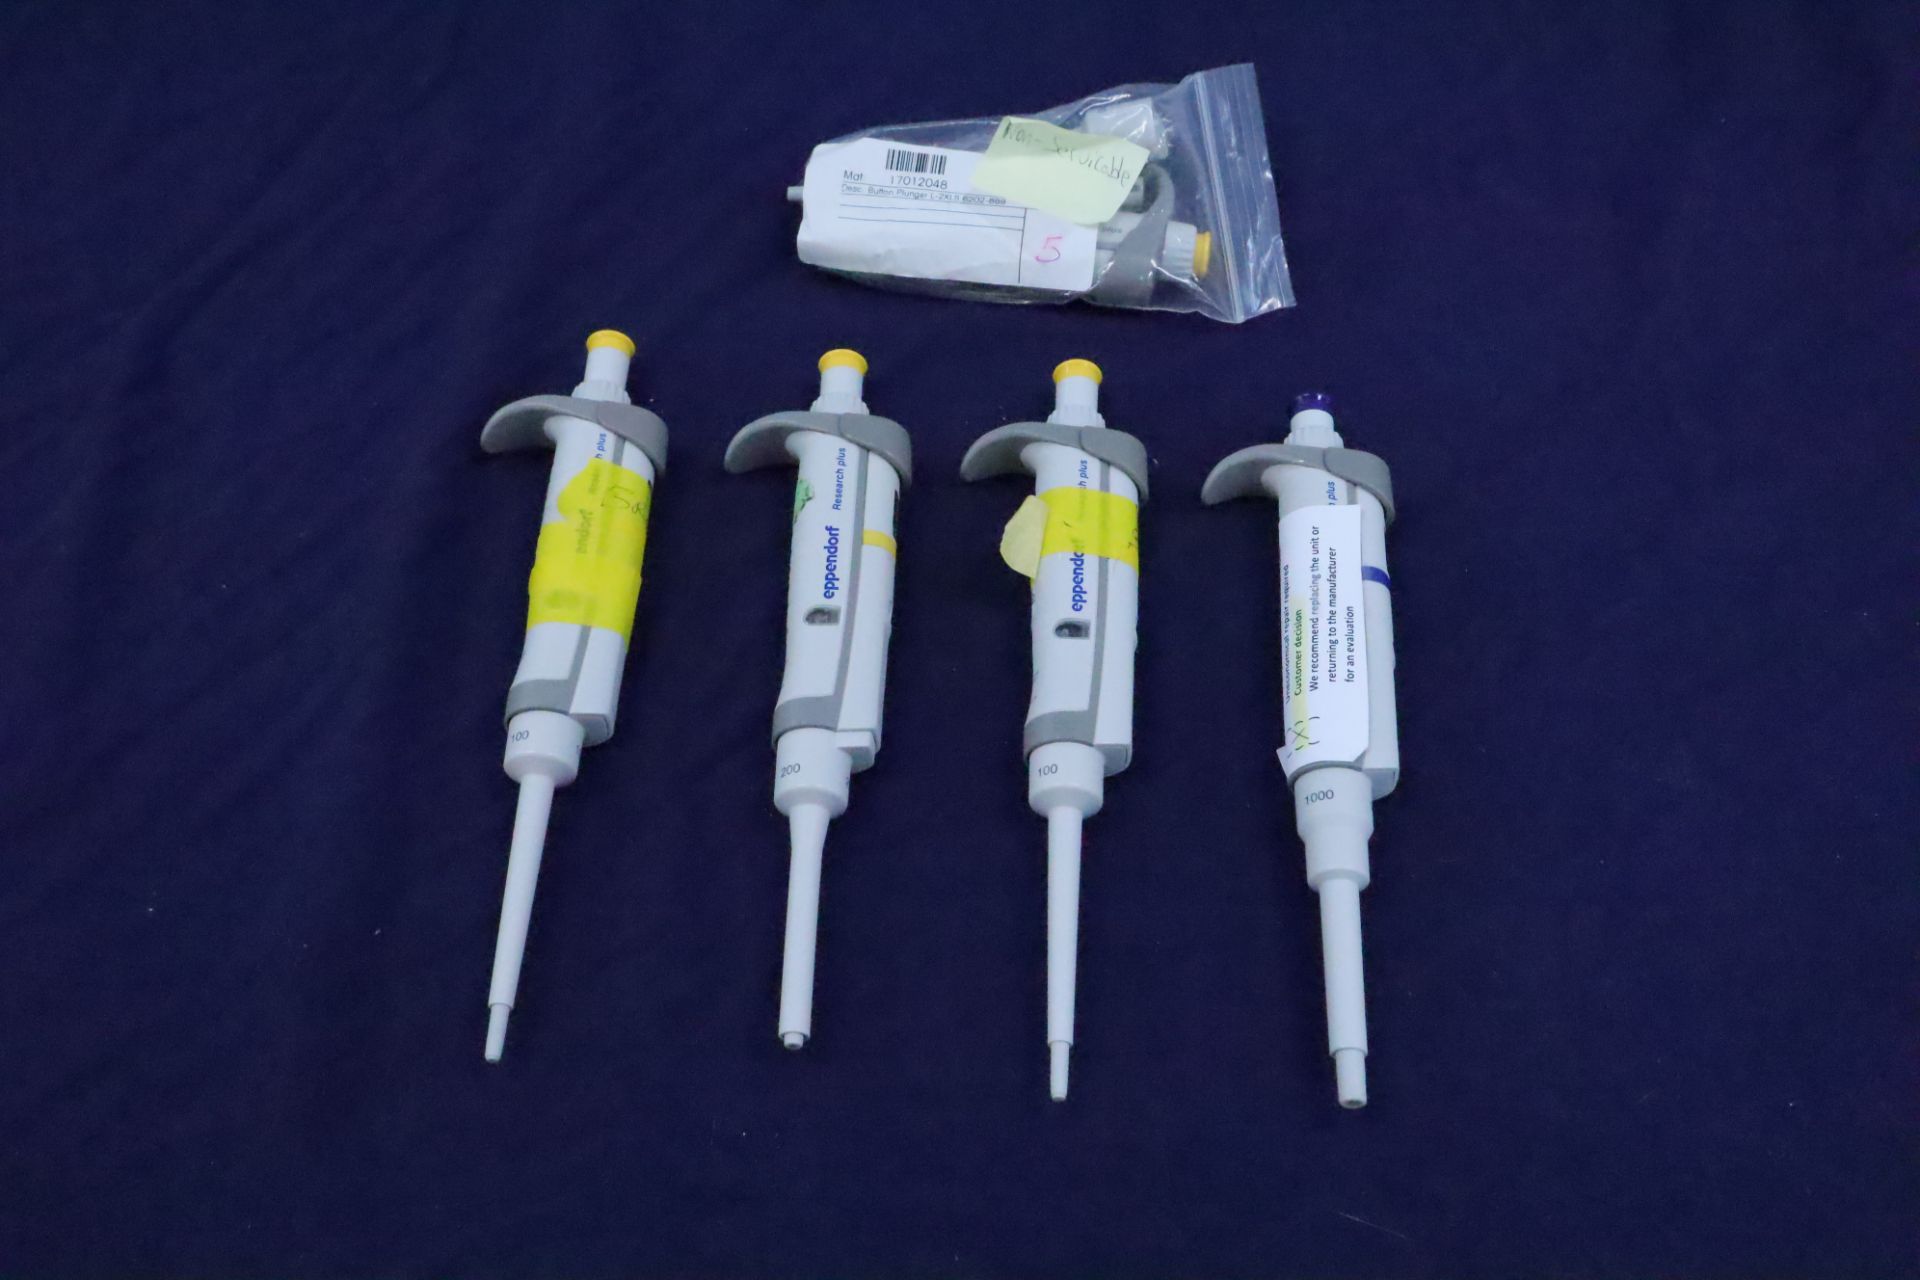 Eppendorf Research Plus Adjustable Volume Pipette - Out Of Service (Qty 5) - Image 2 of 3